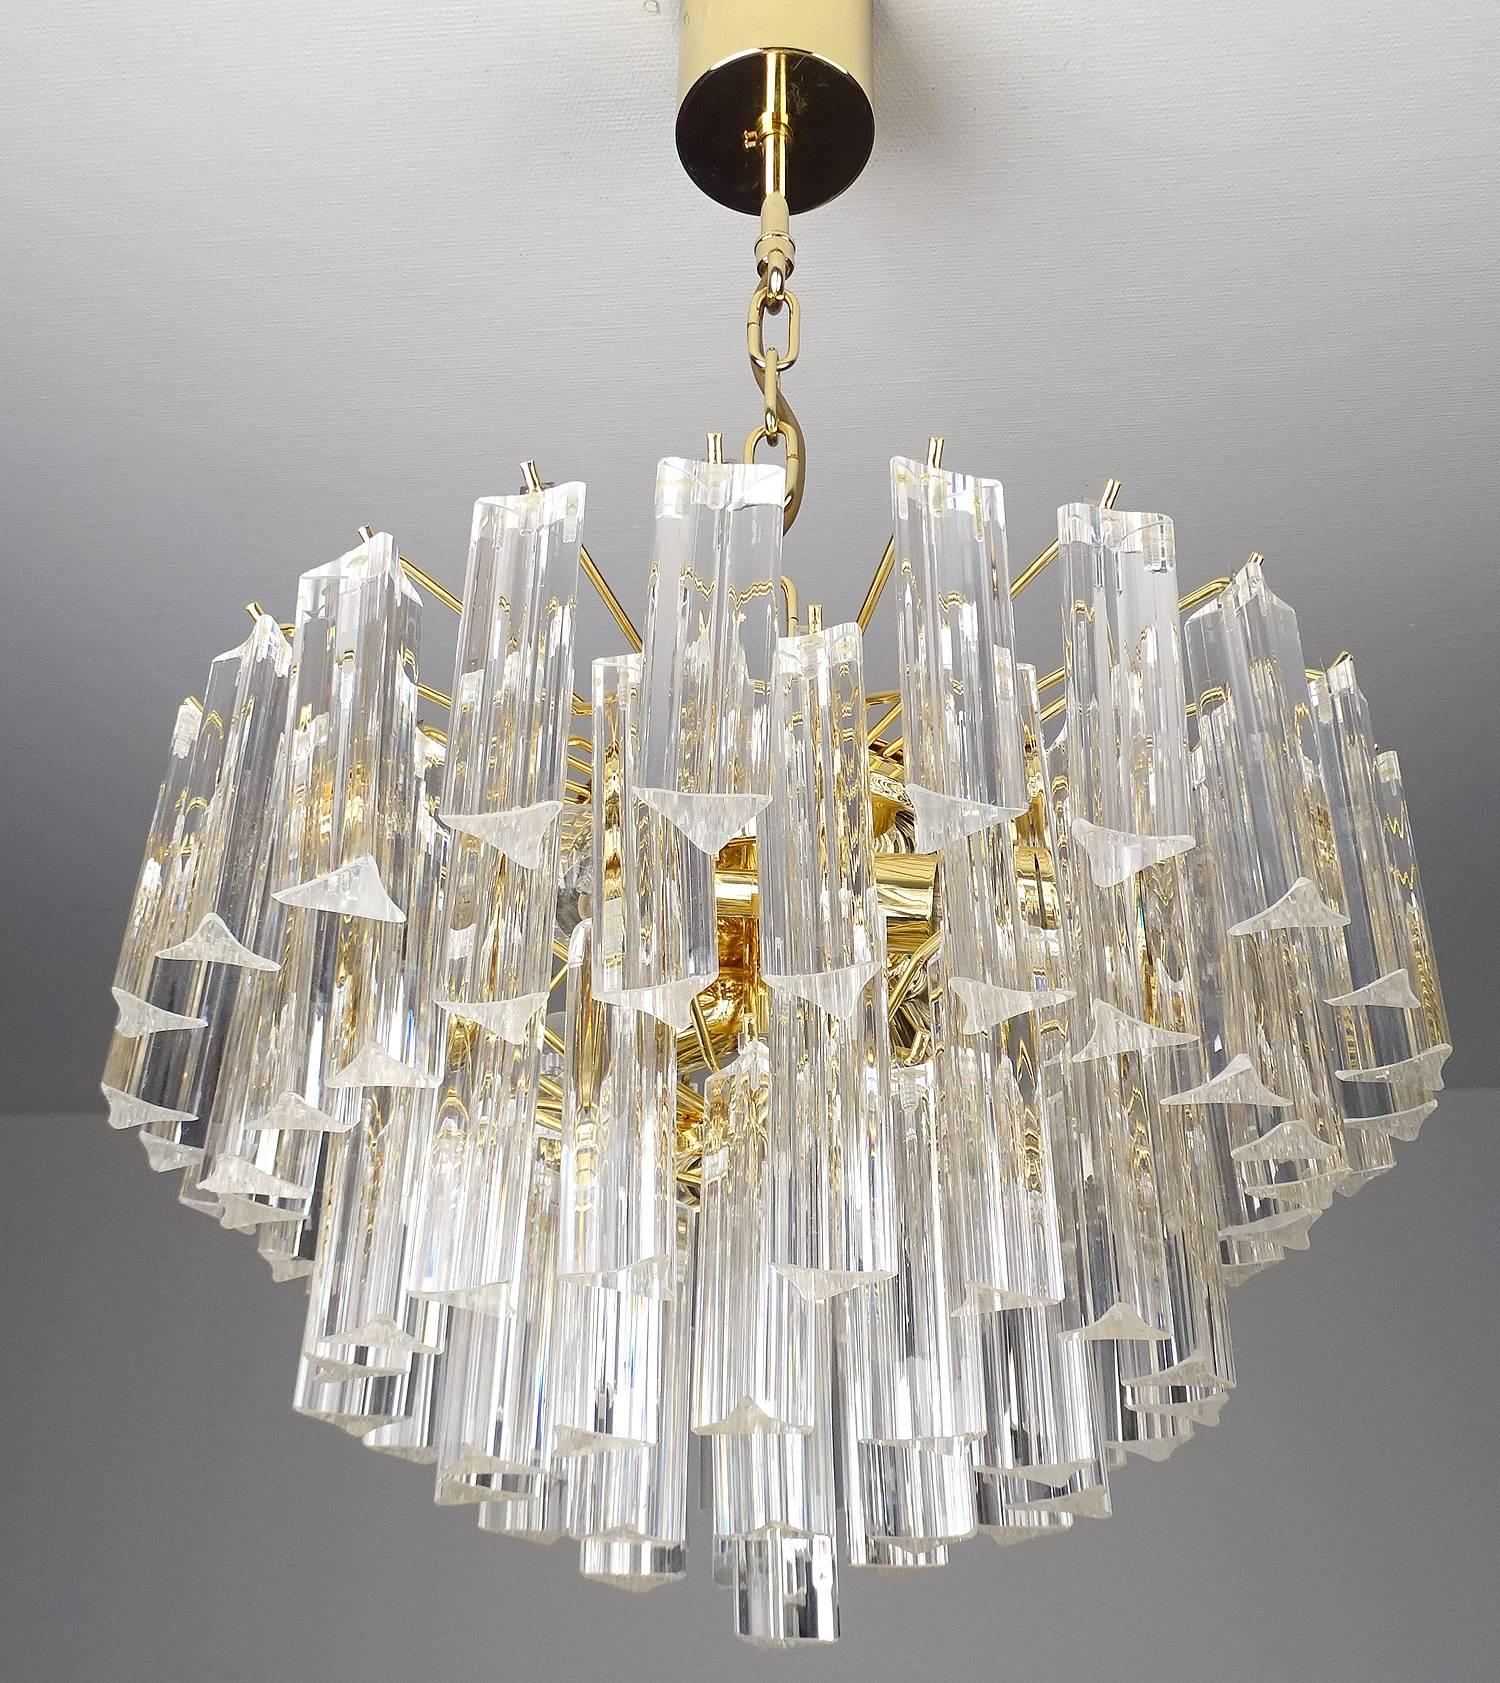 This Mid-Century Modernist chandelier by Venini features individually handmade Murano glass triedre prisms hung in six tiers  individually hung from its gilded frame, hung in a descending form giving it a cascading effect and overall circular form